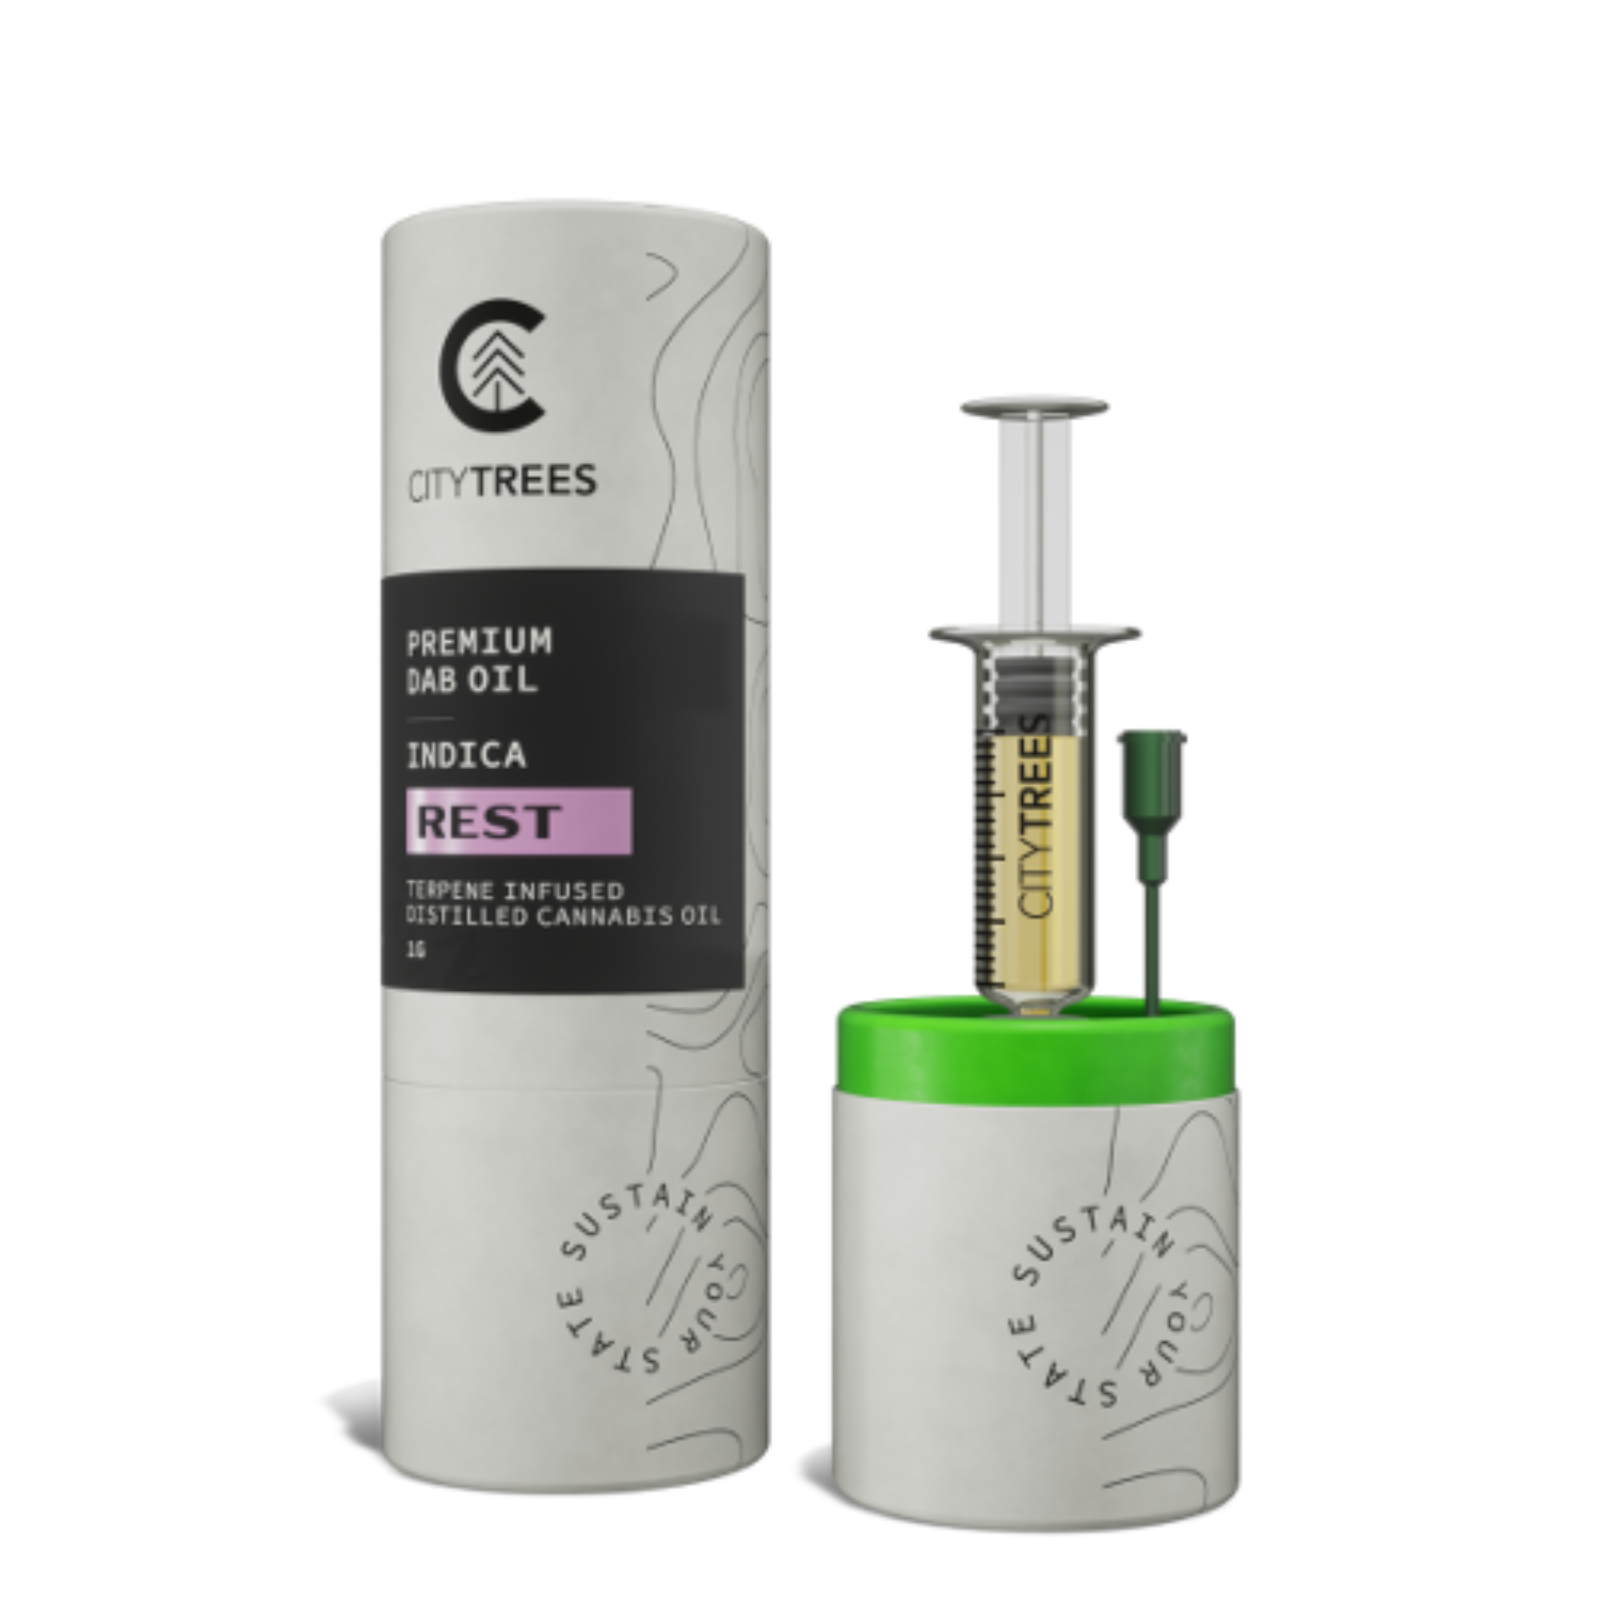 City Trees: City Trees .5g Rest Refill | Leafly